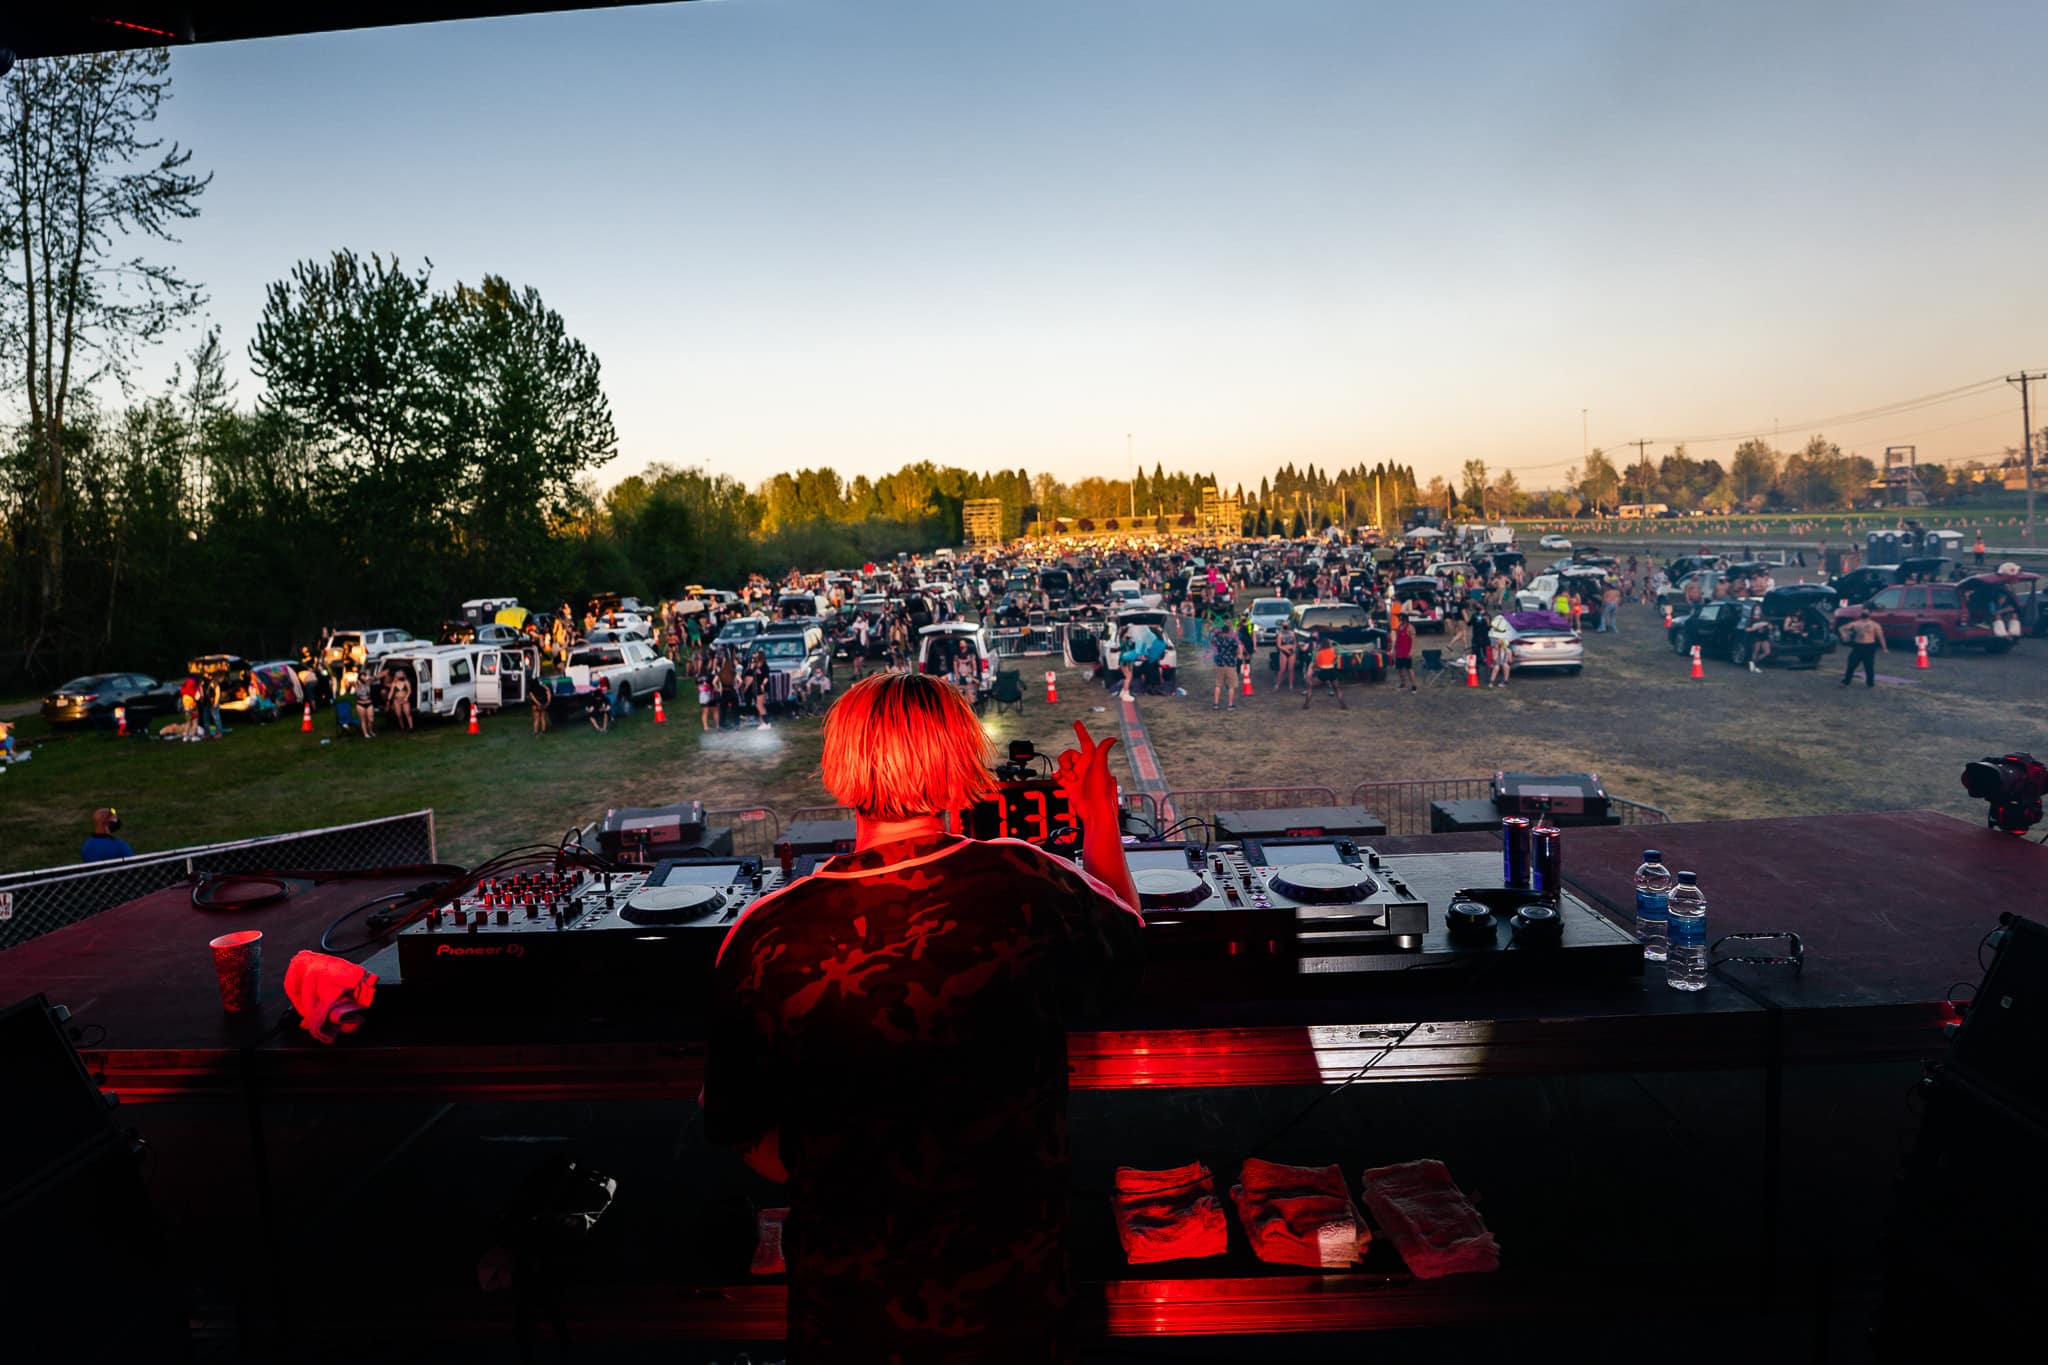 Road Rage Drive-In DJ Booth